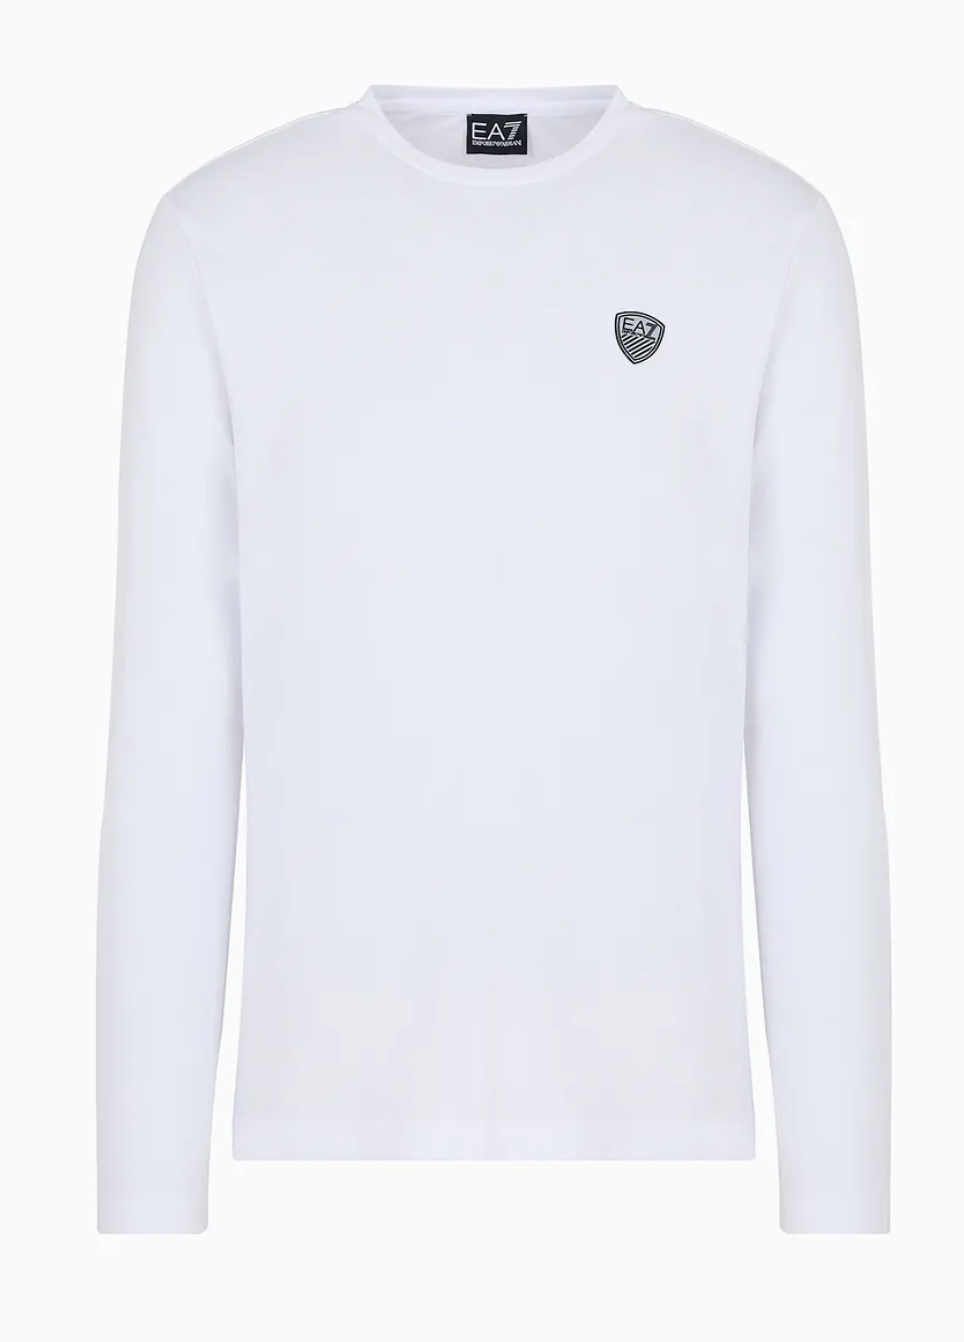 EA7 By Emporio Armani Long Sleeved T-Shirt White